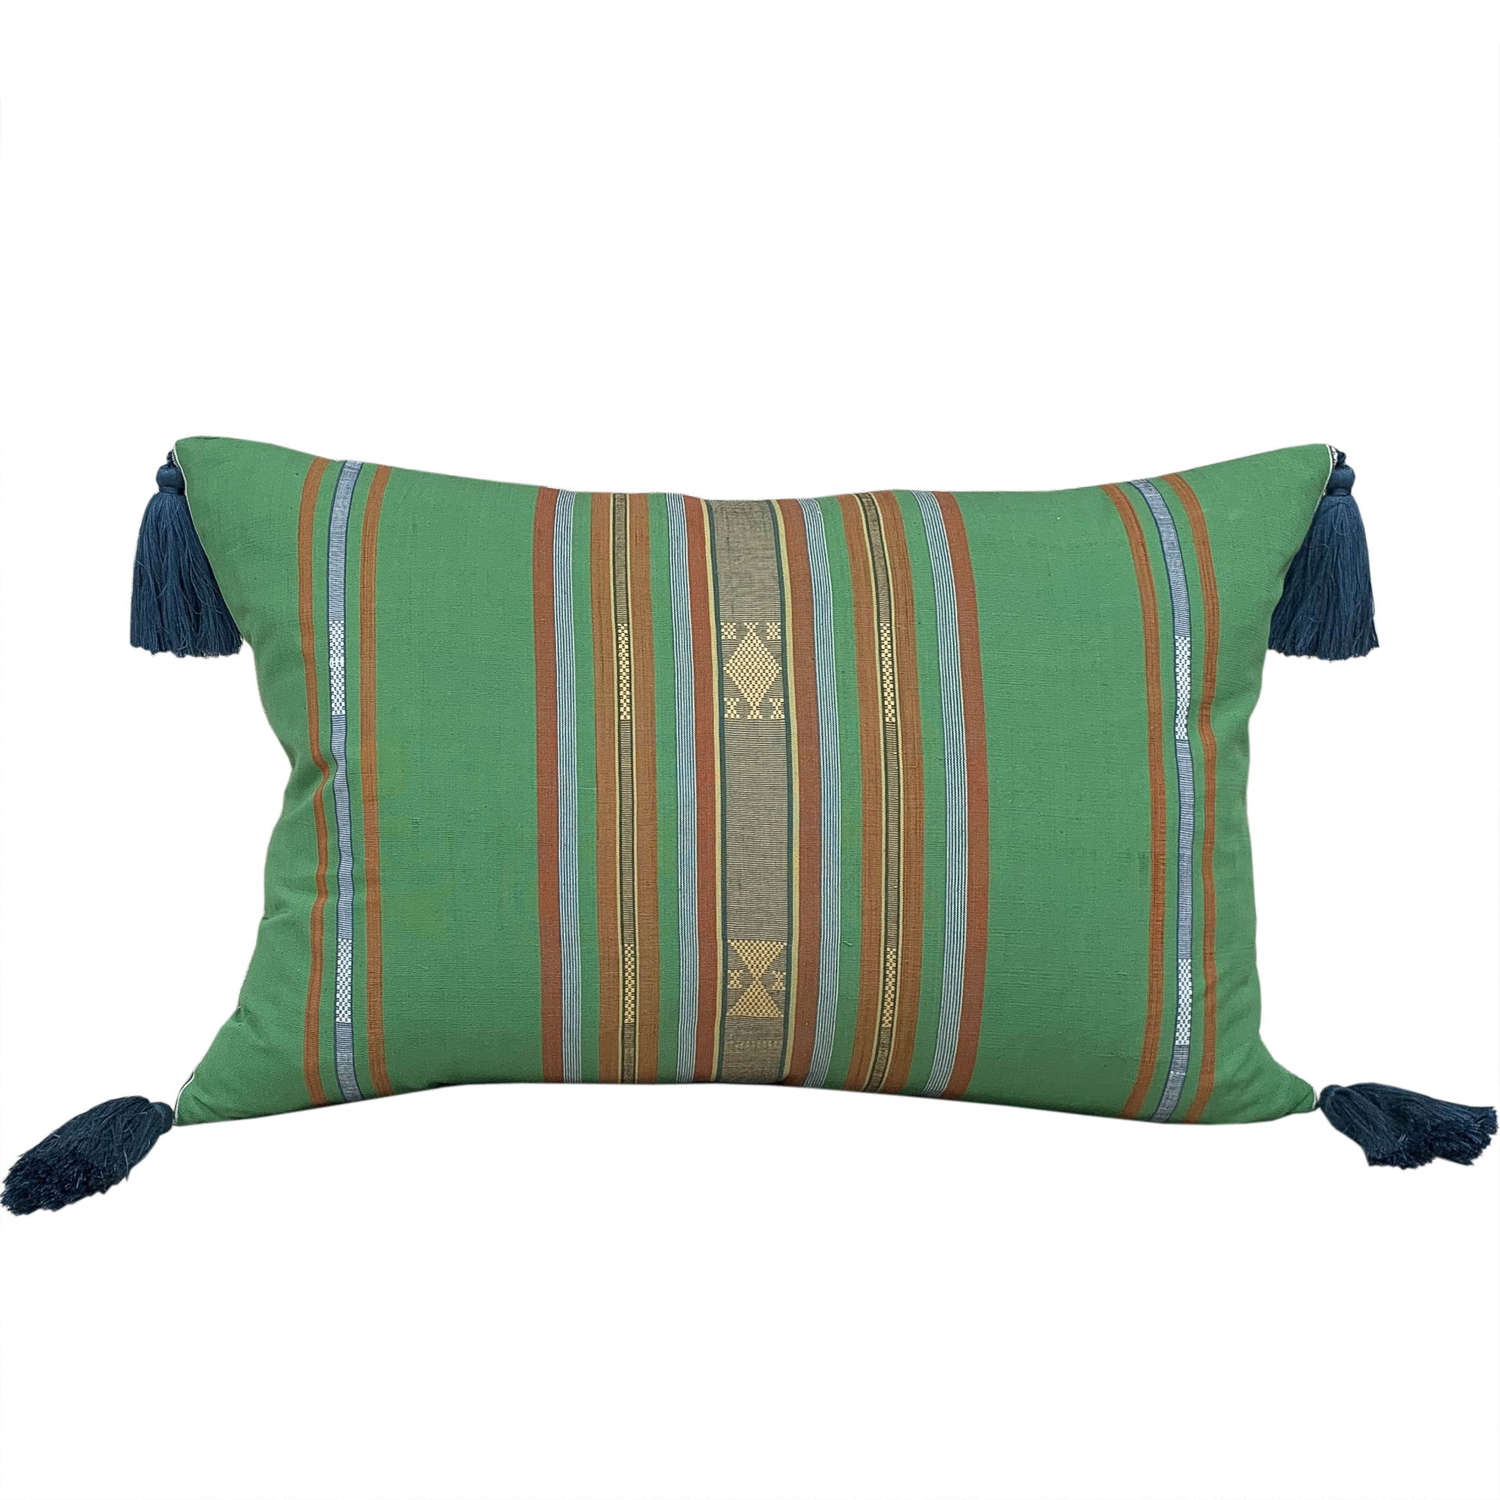 Green Lombok cushions with blue tassels